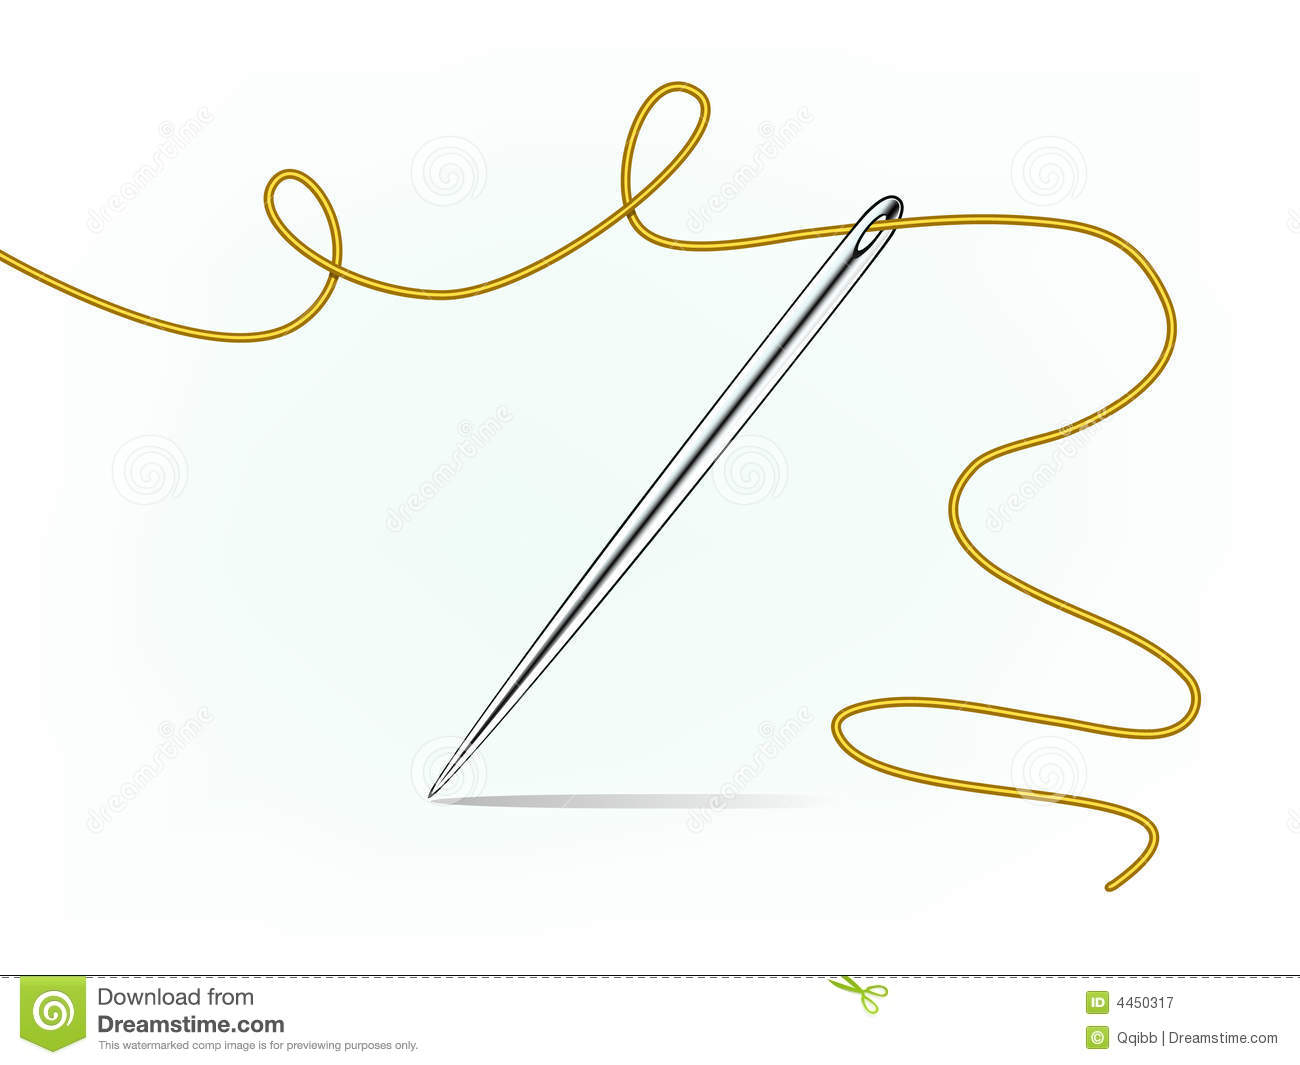 Clip-art of needle and thread